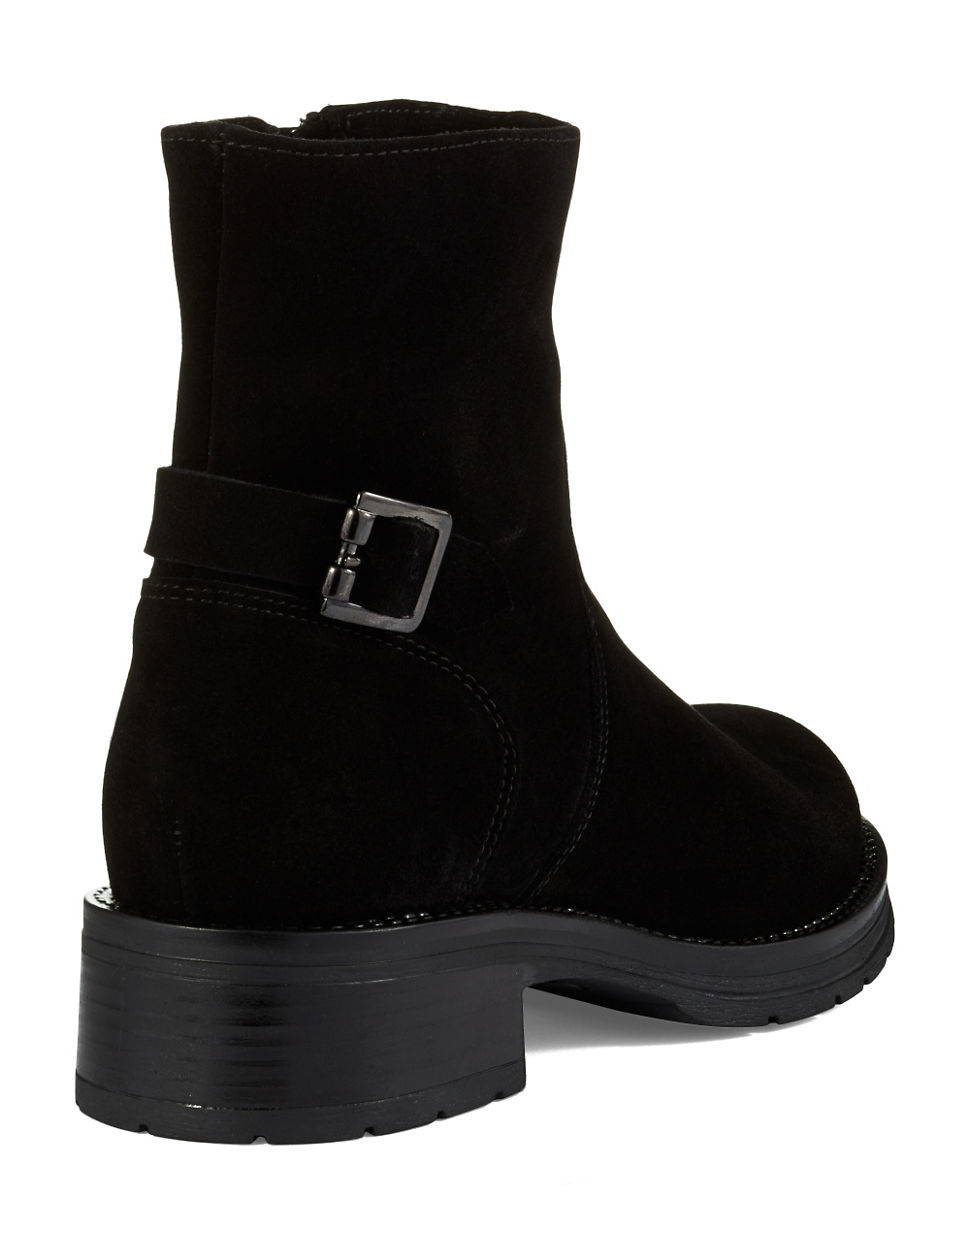 lord and taylor la canadienne boots